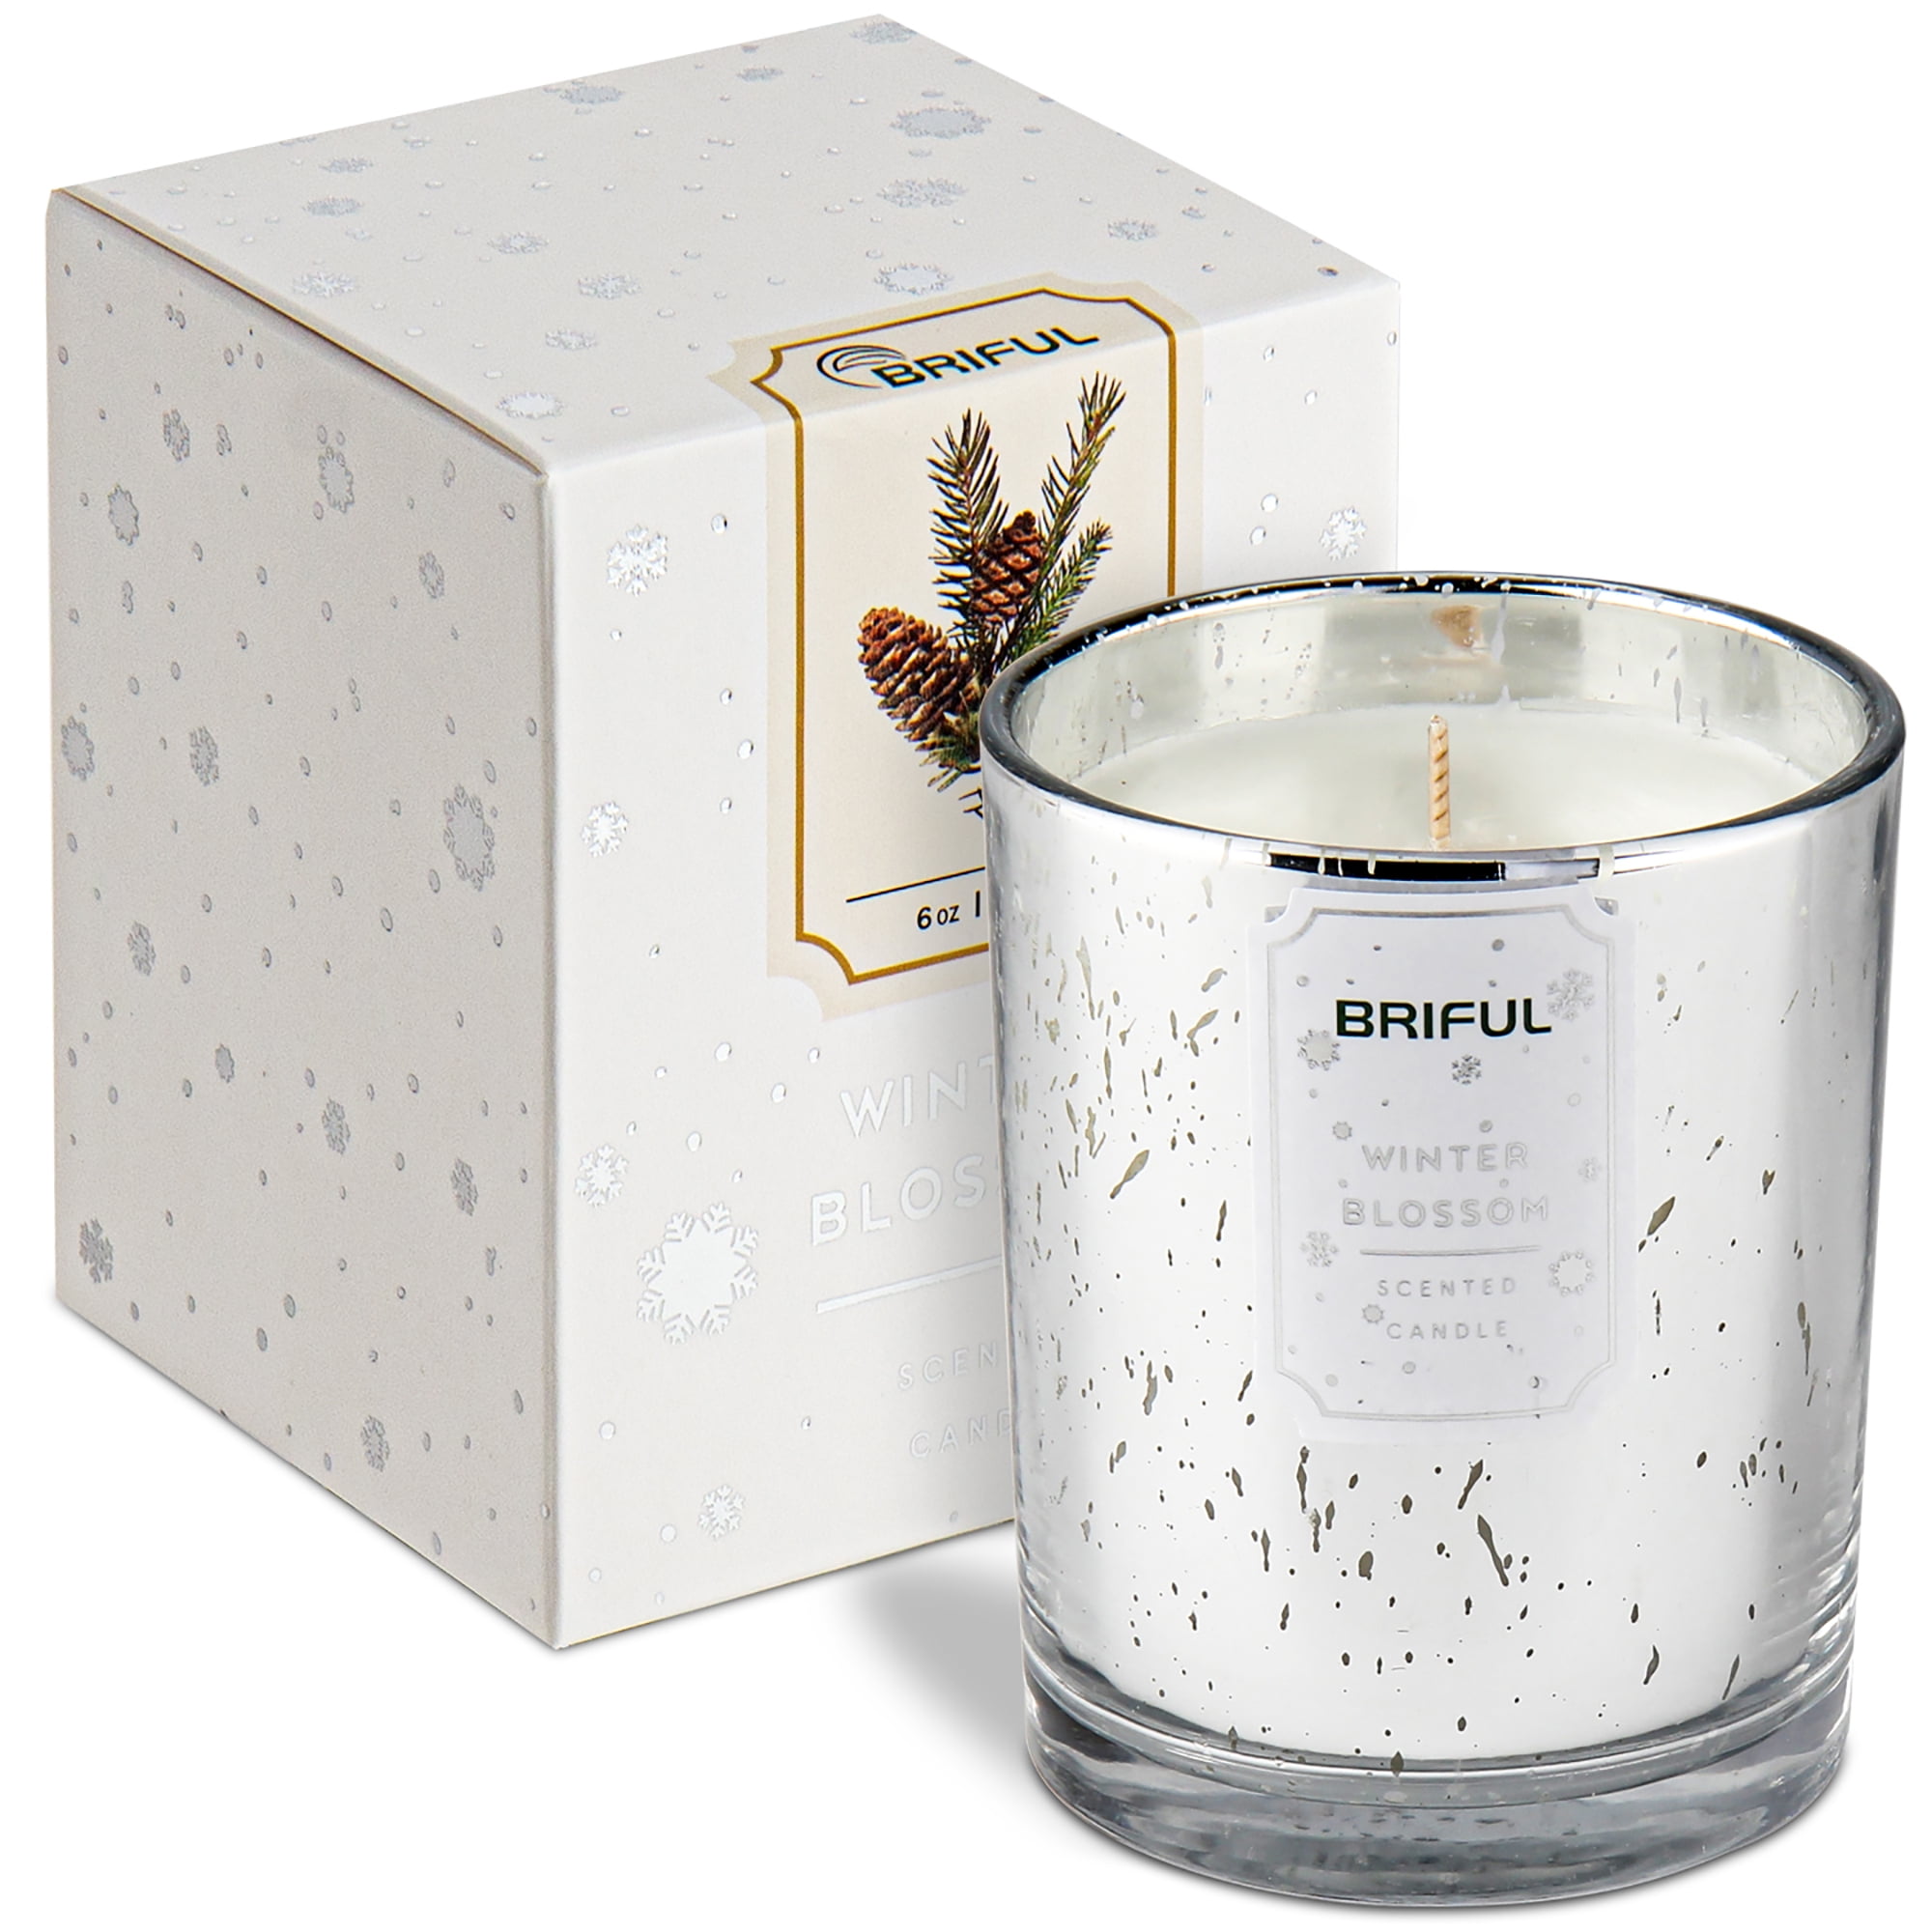 Illume Small Winter White Holiday Scented Candle<br /> + Reviews